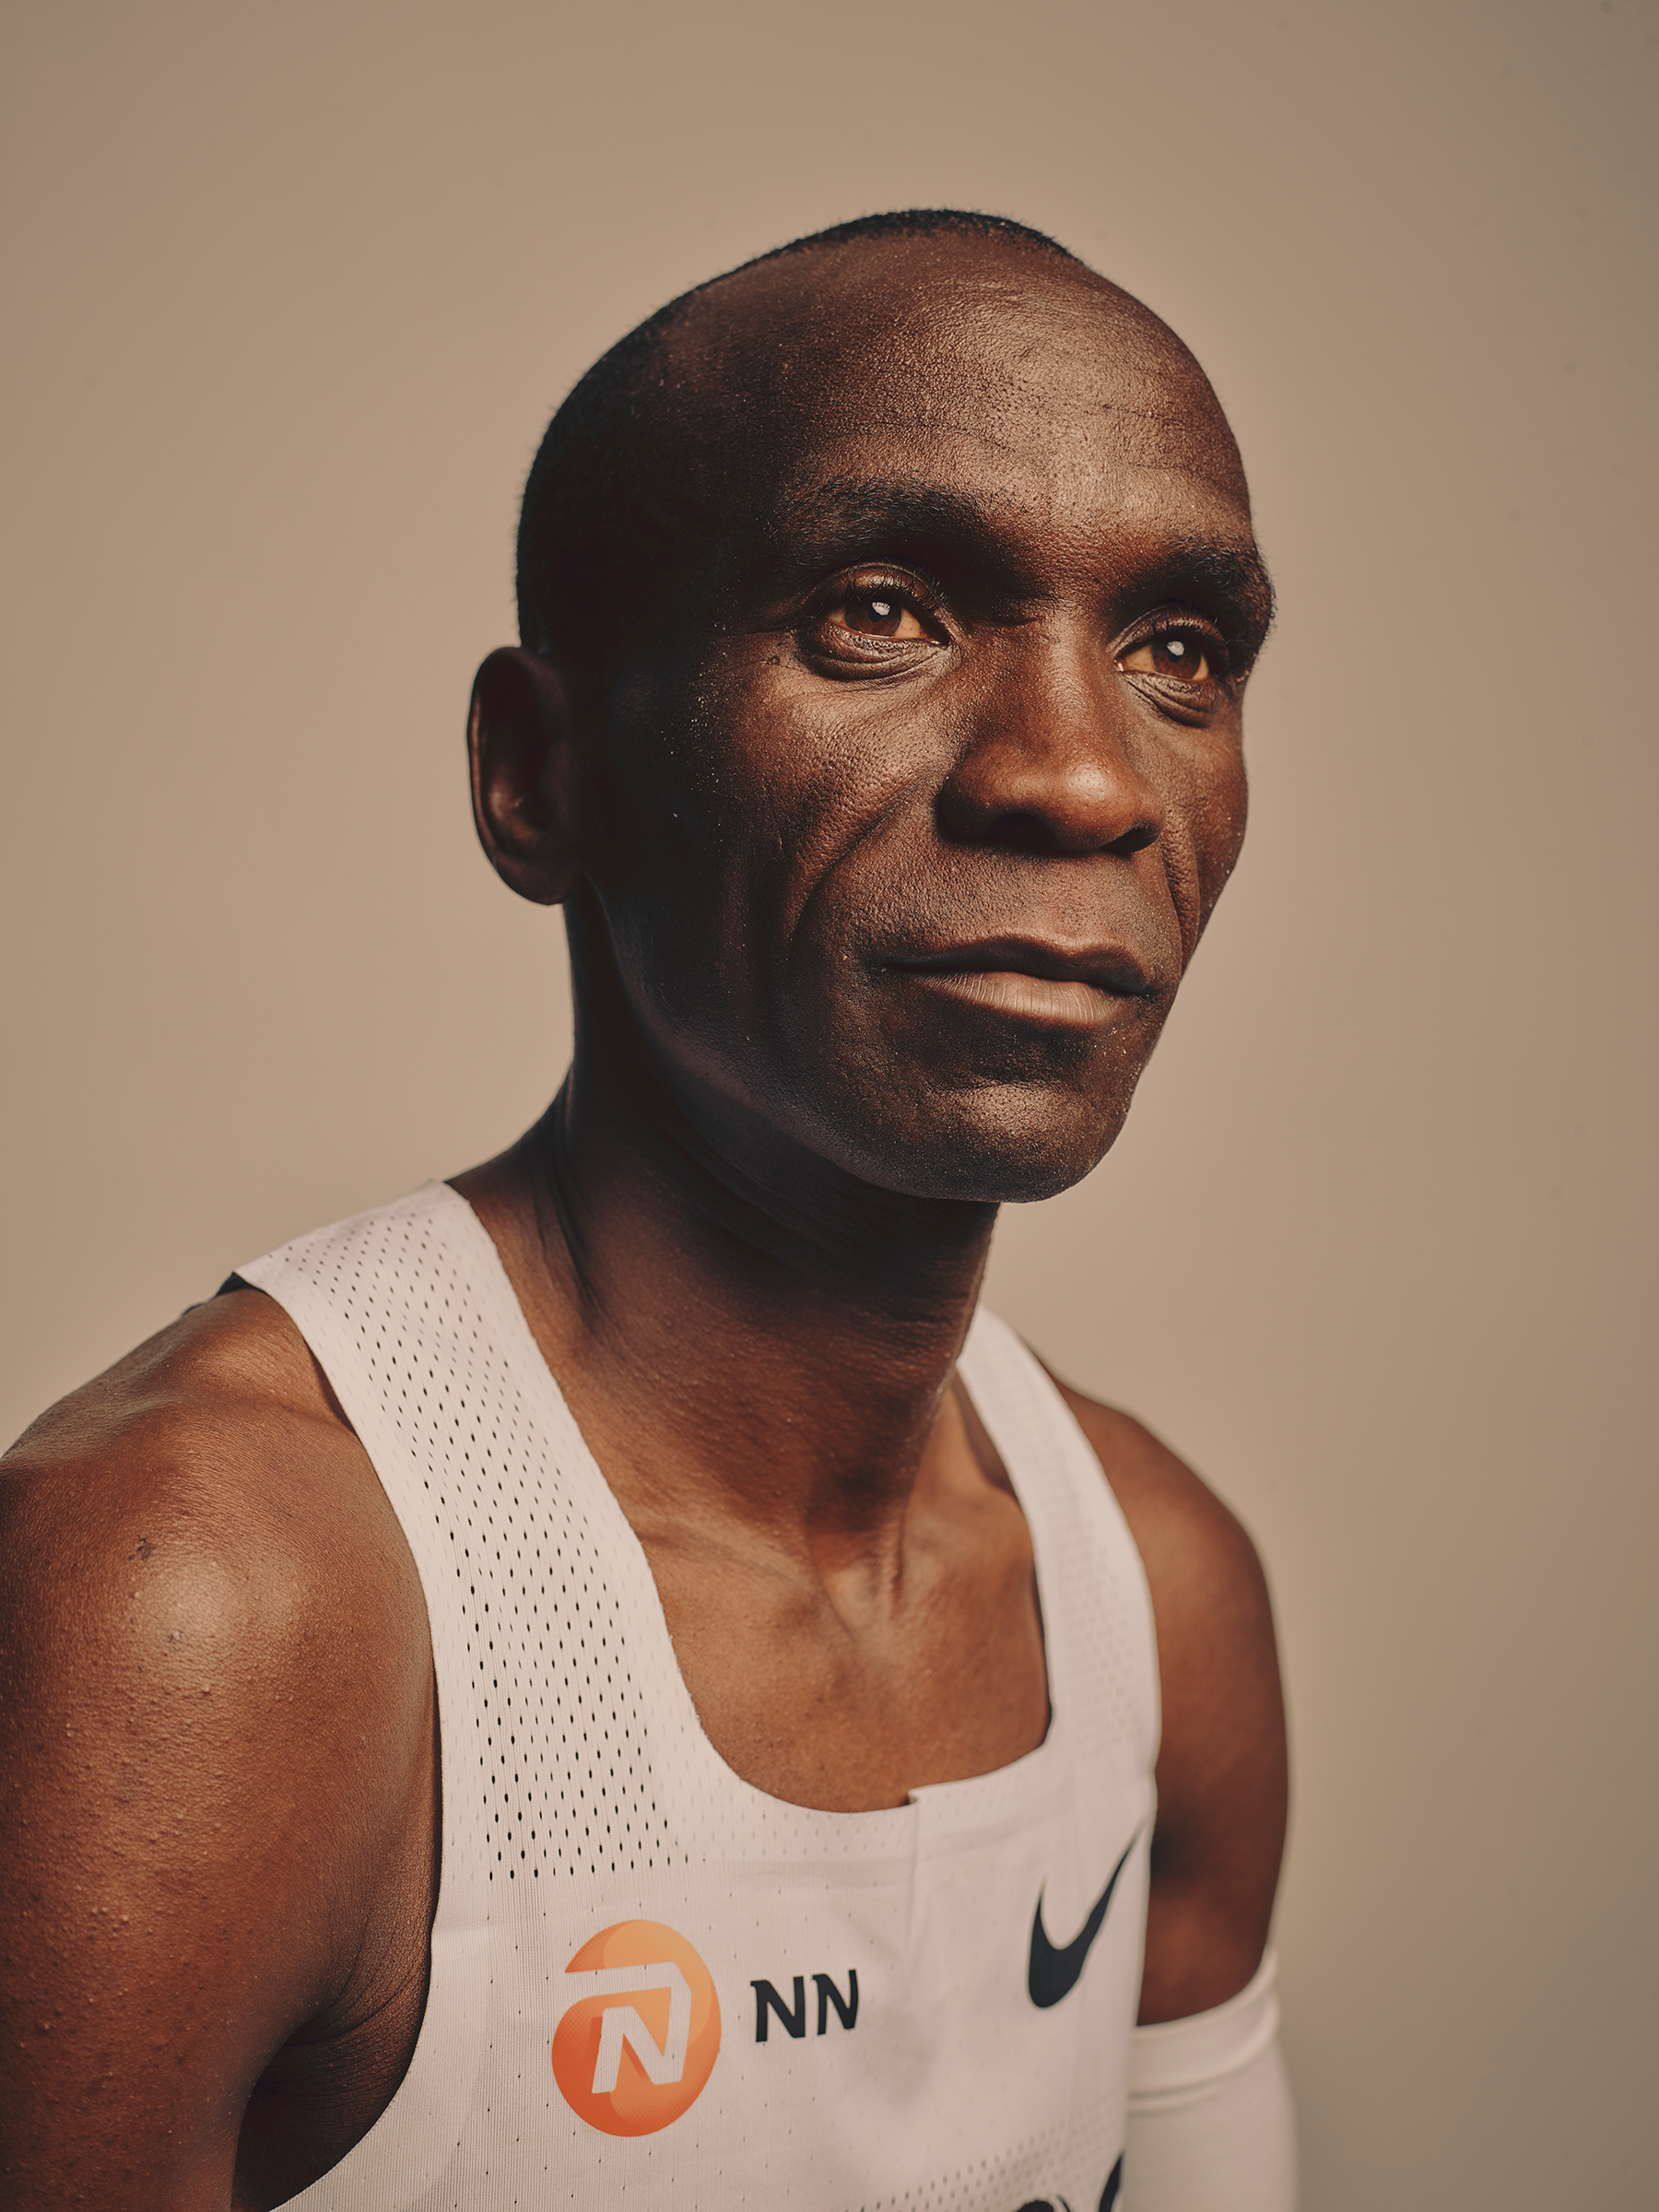 Eliud Kipchoge, photographed after his historic race in Vienna, on Oct. 12. (Tom Jamieson)